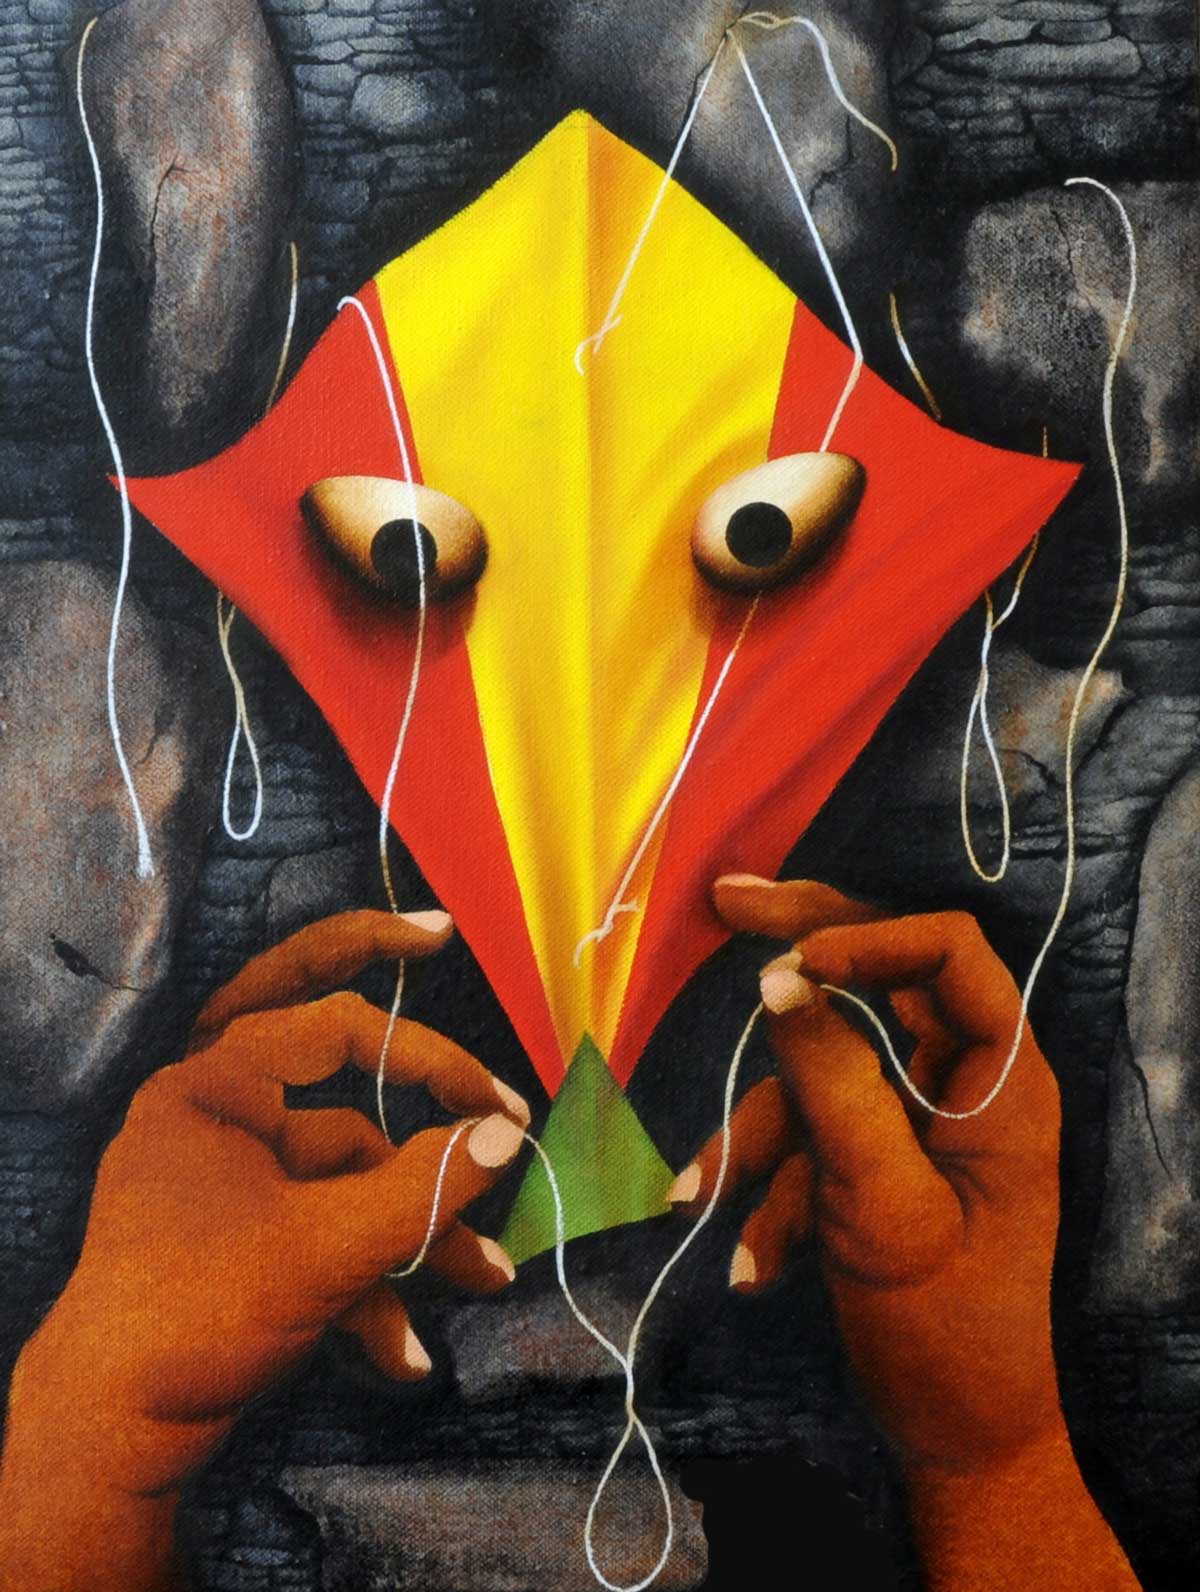 Contemporary Painting with Oil on Canvas "Kite" art by Abbas Batliwala